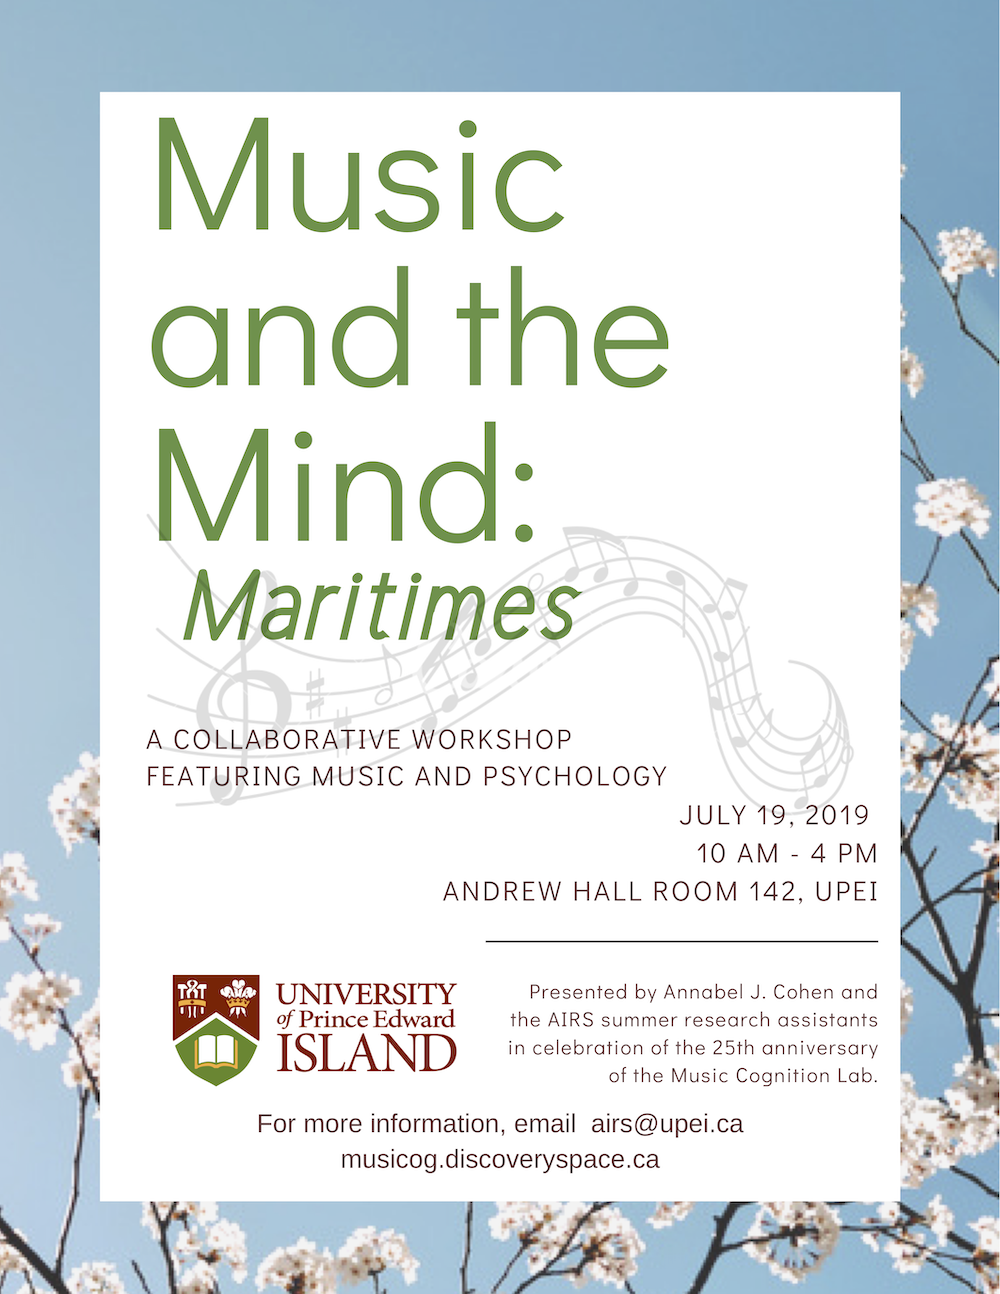 Music and the mind: Maritimes workshop July 19, 2019